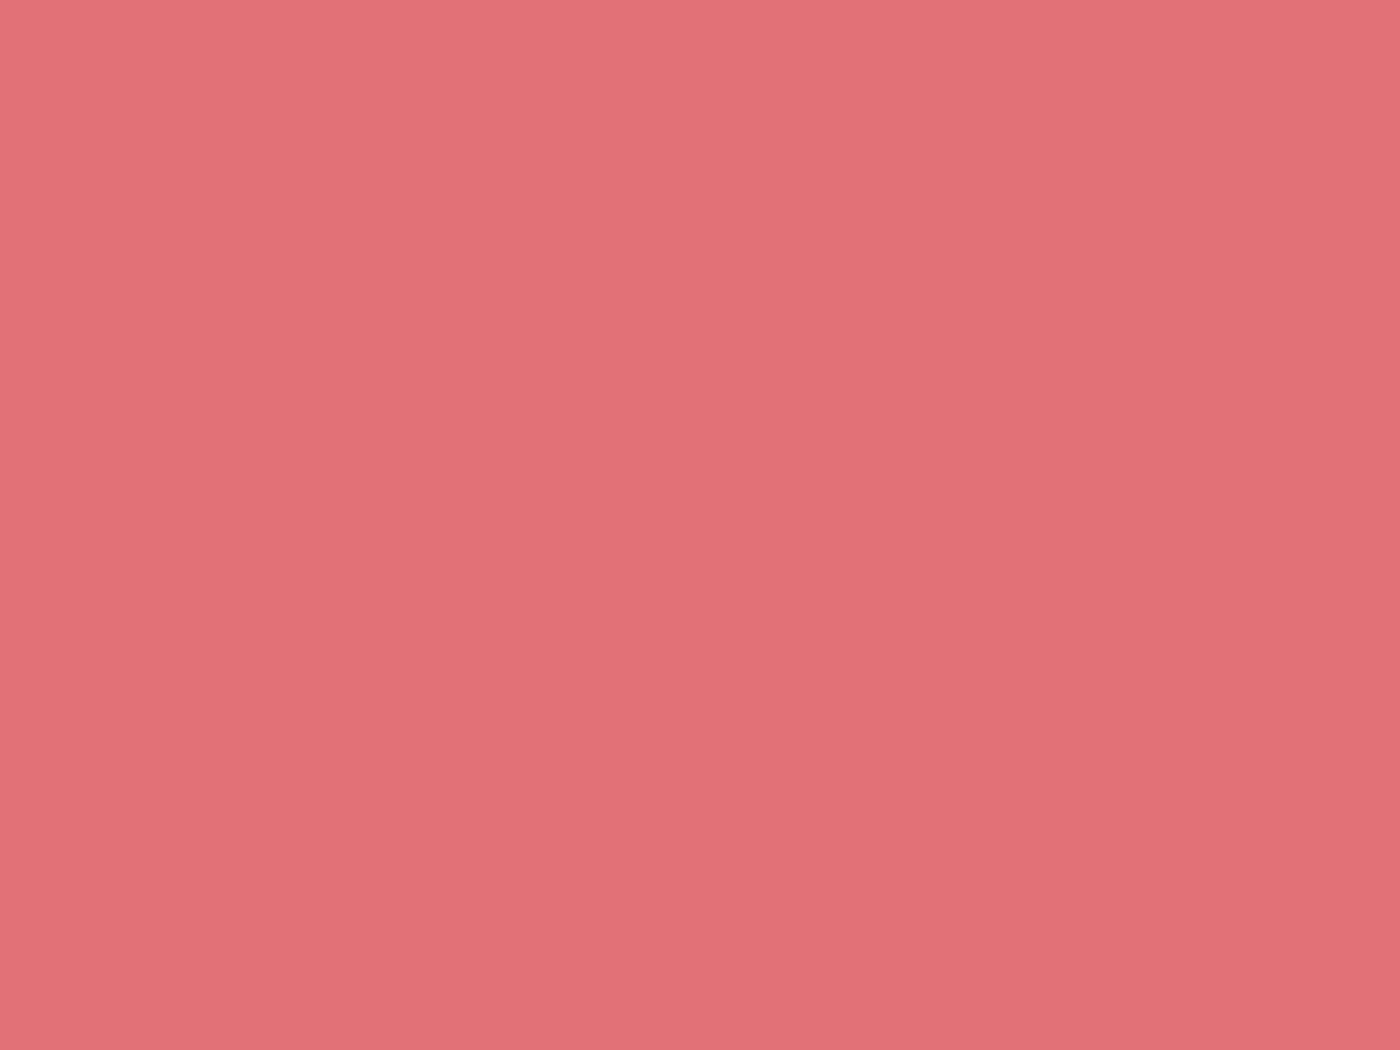 1400x1050 Tango Pink Solid Color Background